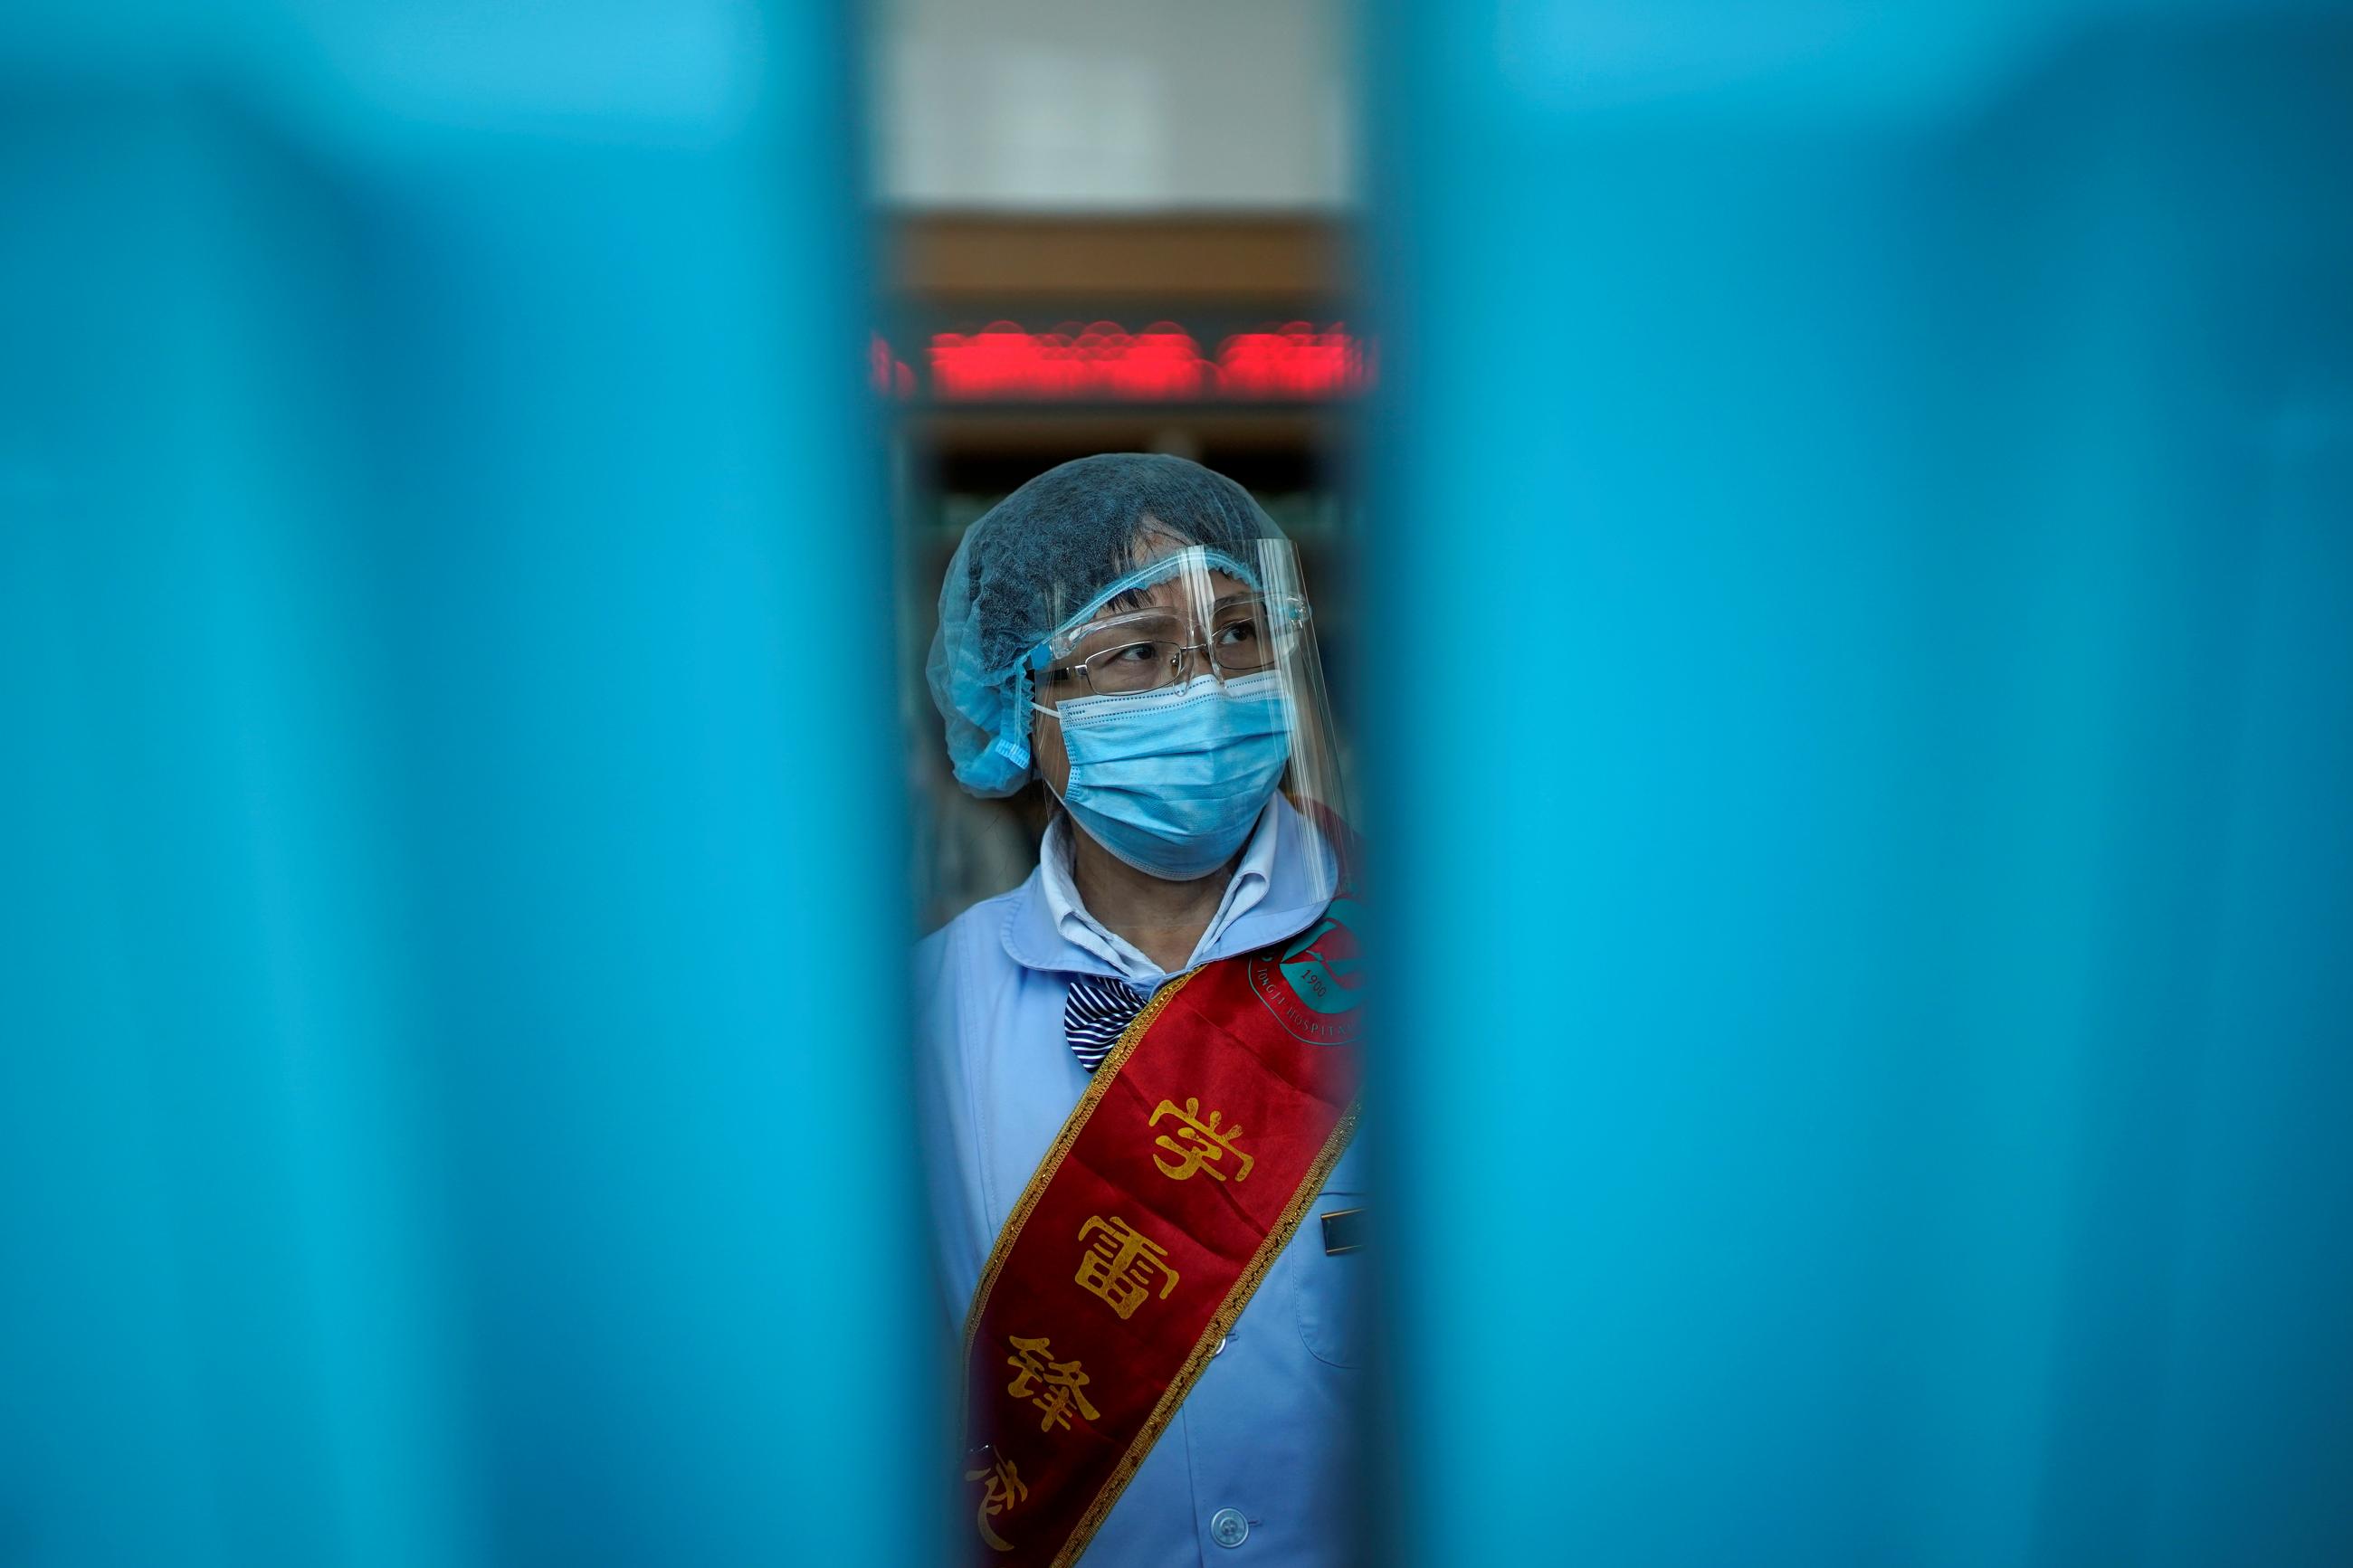  worker wears a mask and a face shield during a government organised media tour at Tongji Hospital following the coronavirus disease (COVID-19) outbreak, in Wuhan, Hubei province, China 